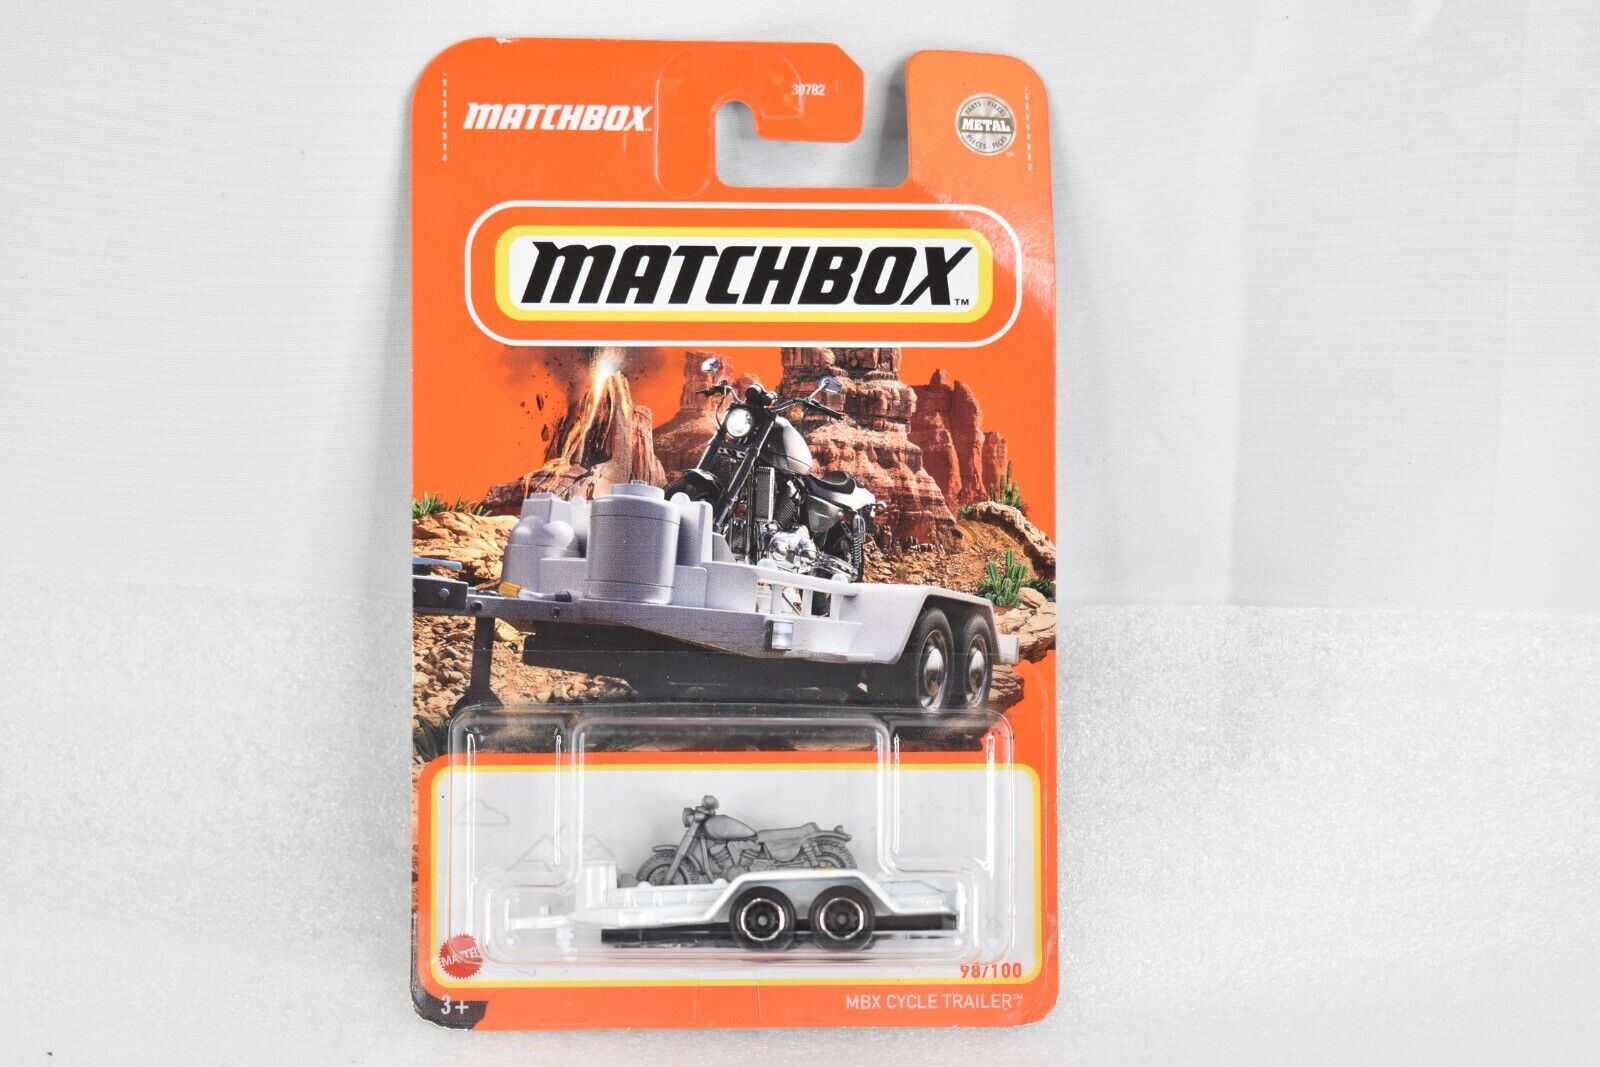 2022 Matchbox white regular MBX CYCLE TRAILER impound SHERIFF 98/100 off road